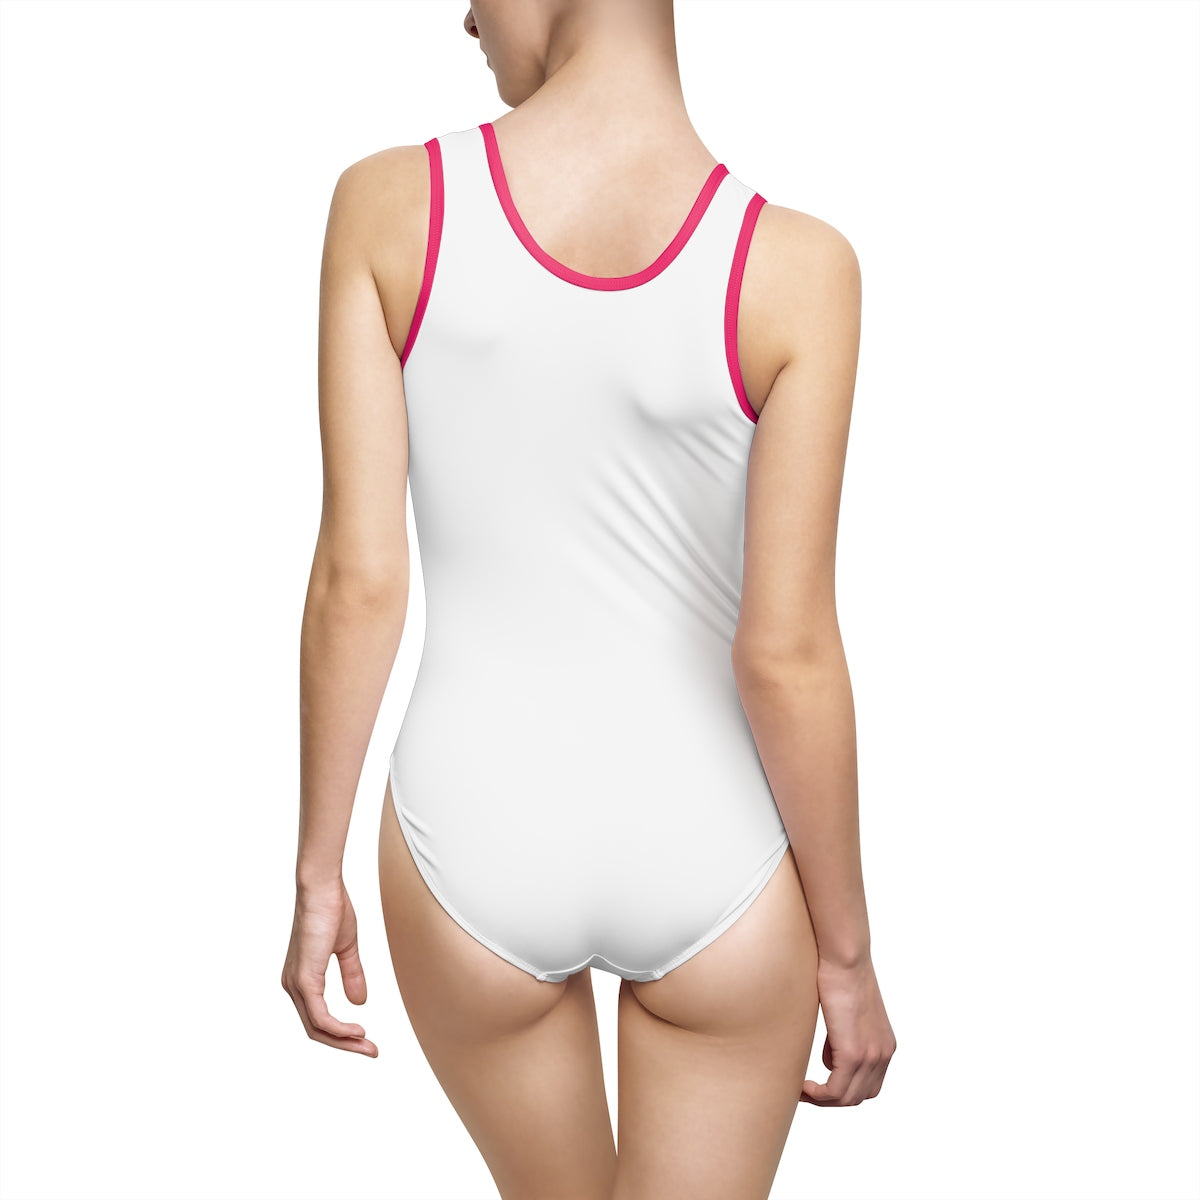 The Real MVP WIFEY Women's Classic One-Piece Swimsuit